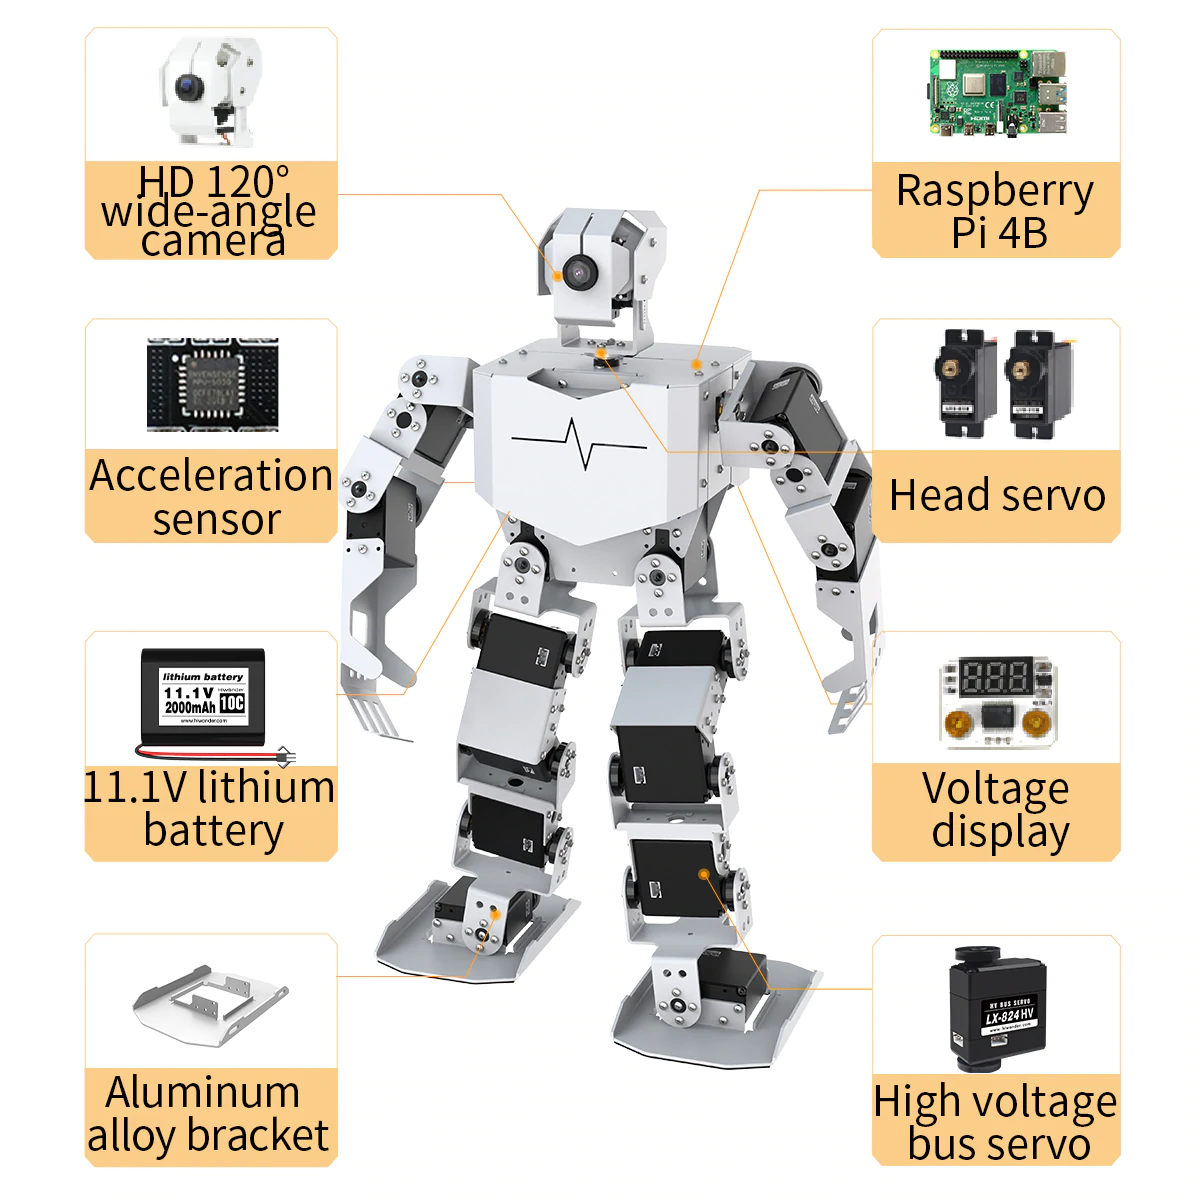 humanoid robot importer, humanoid robot importer Suppliers and